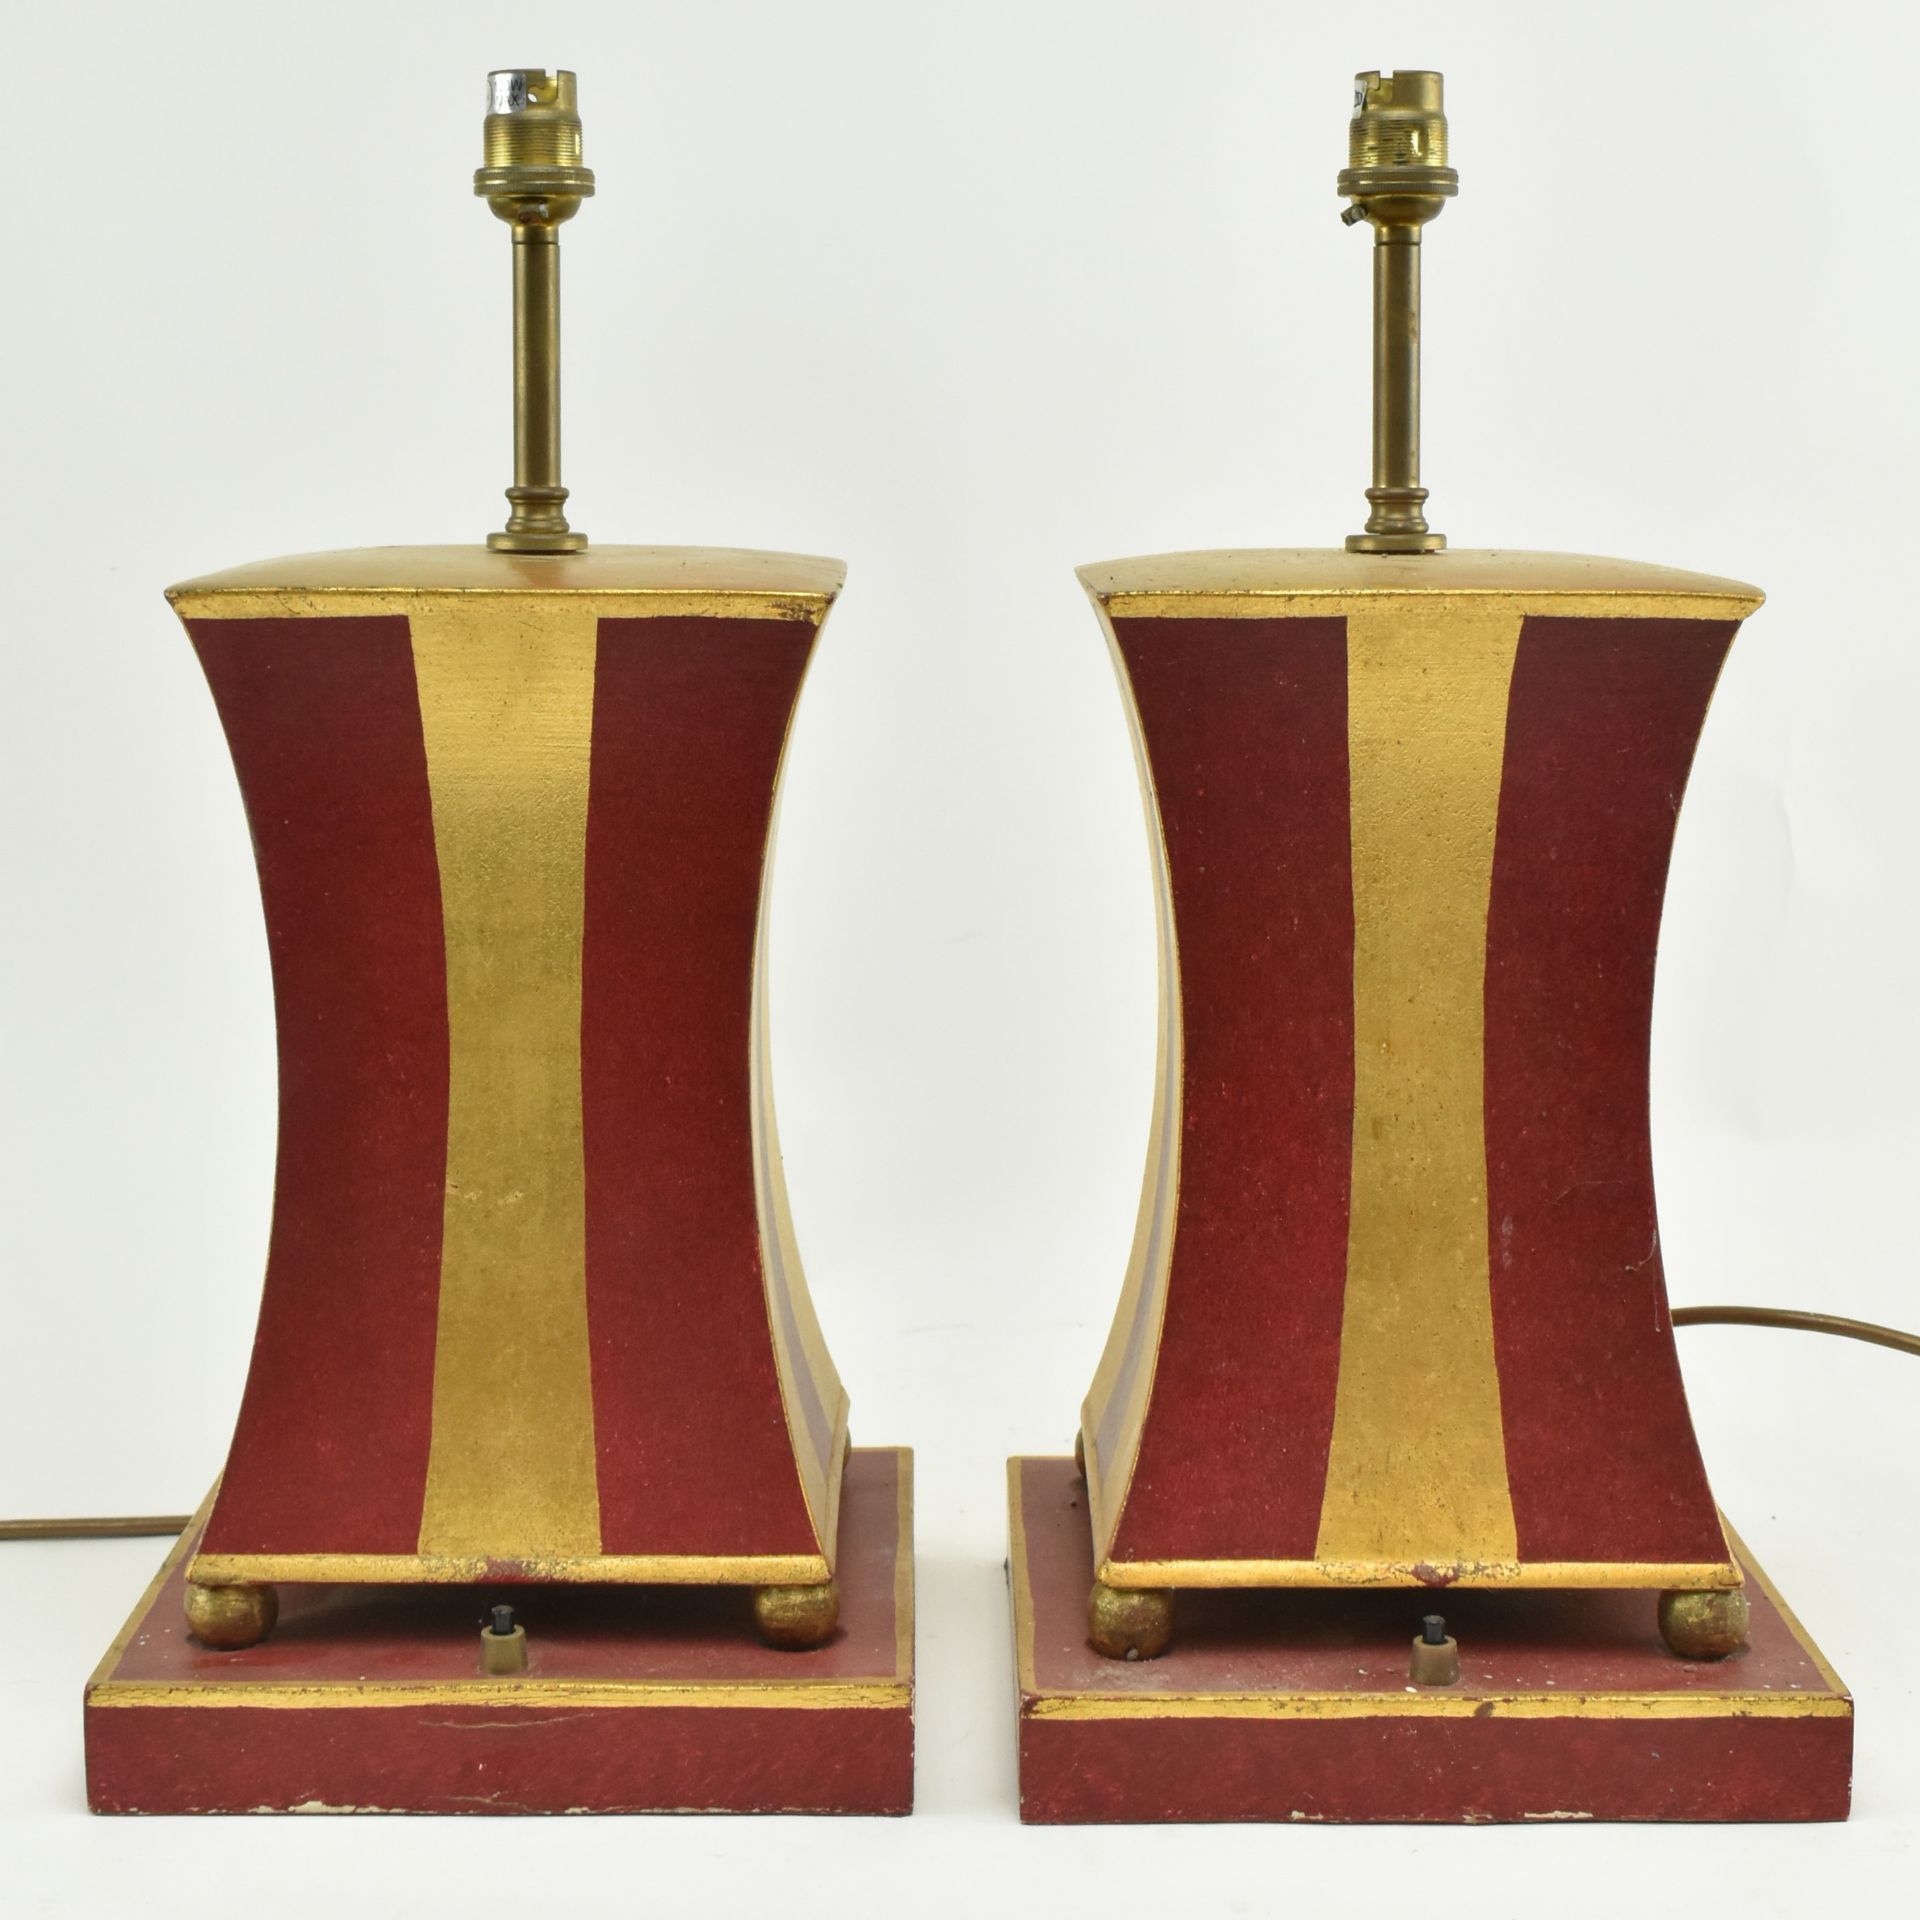 PORTA ROMANA - PAIR OF GOLD & RED PAINTED DESK TABLE LAMPS